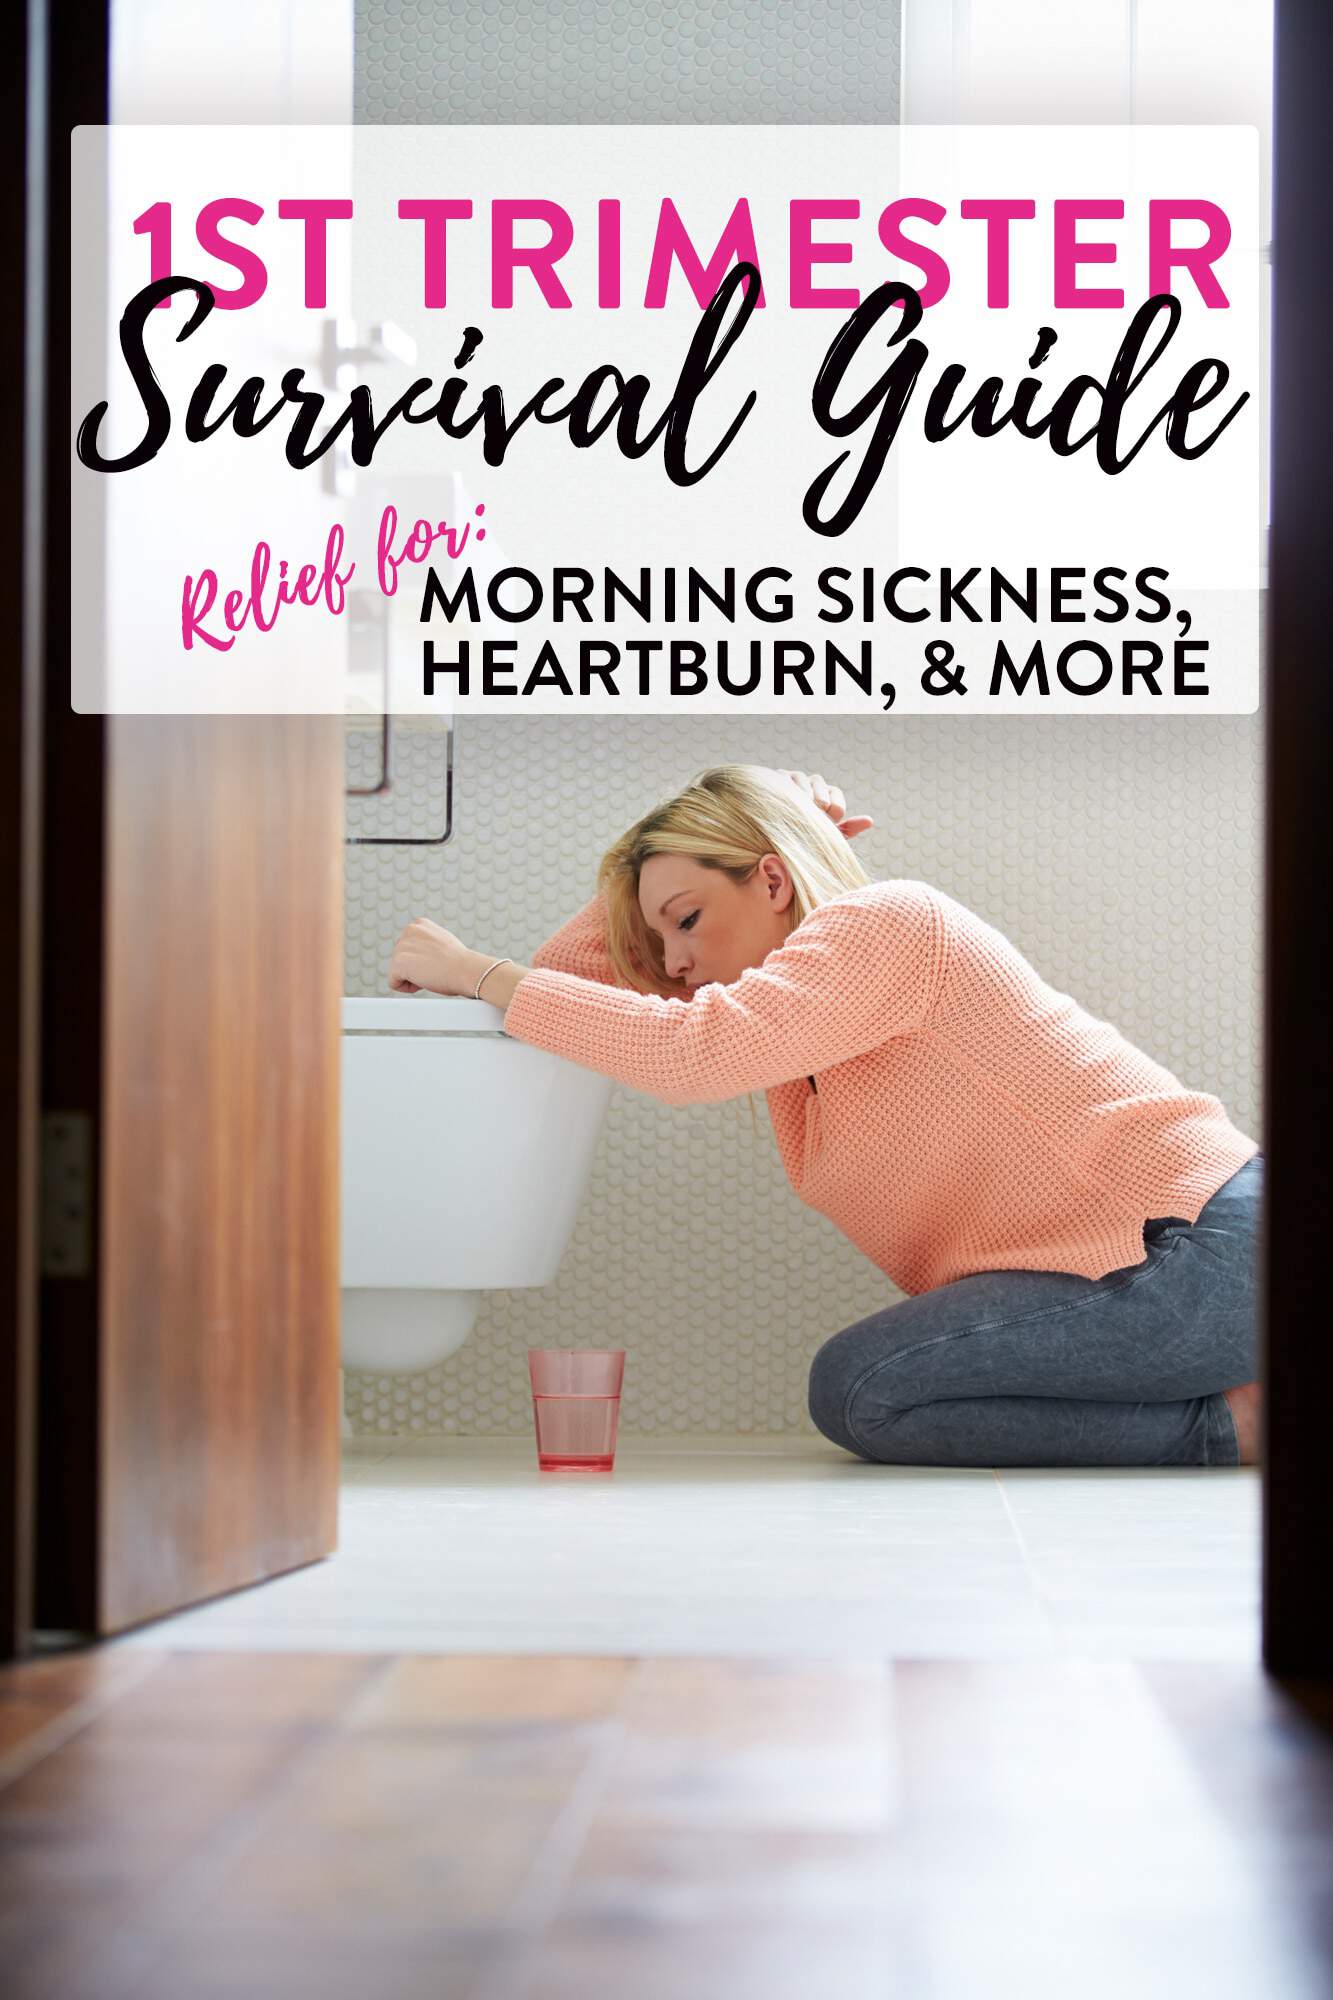 First Trimester Survival Guide Morning Sickness, Heartburn and More.